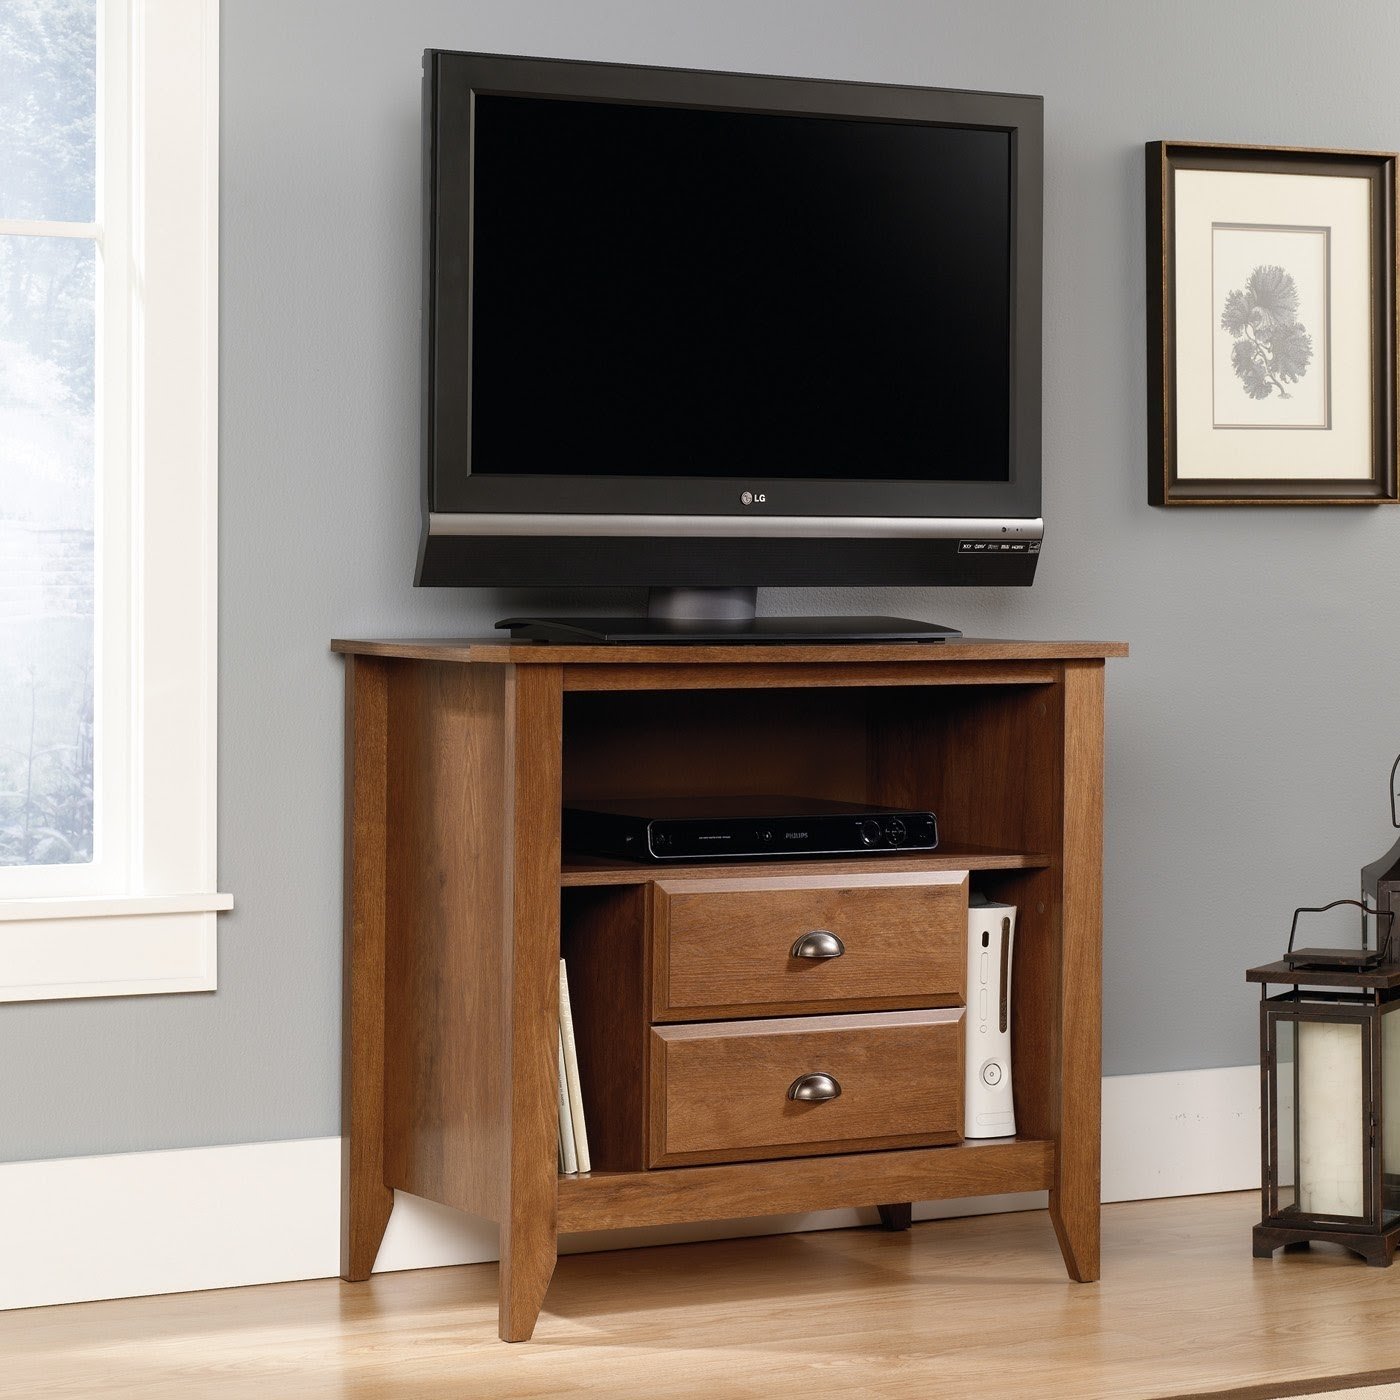 Tv Stand For Bedroom You Ll Love In 2021 Visualhunt